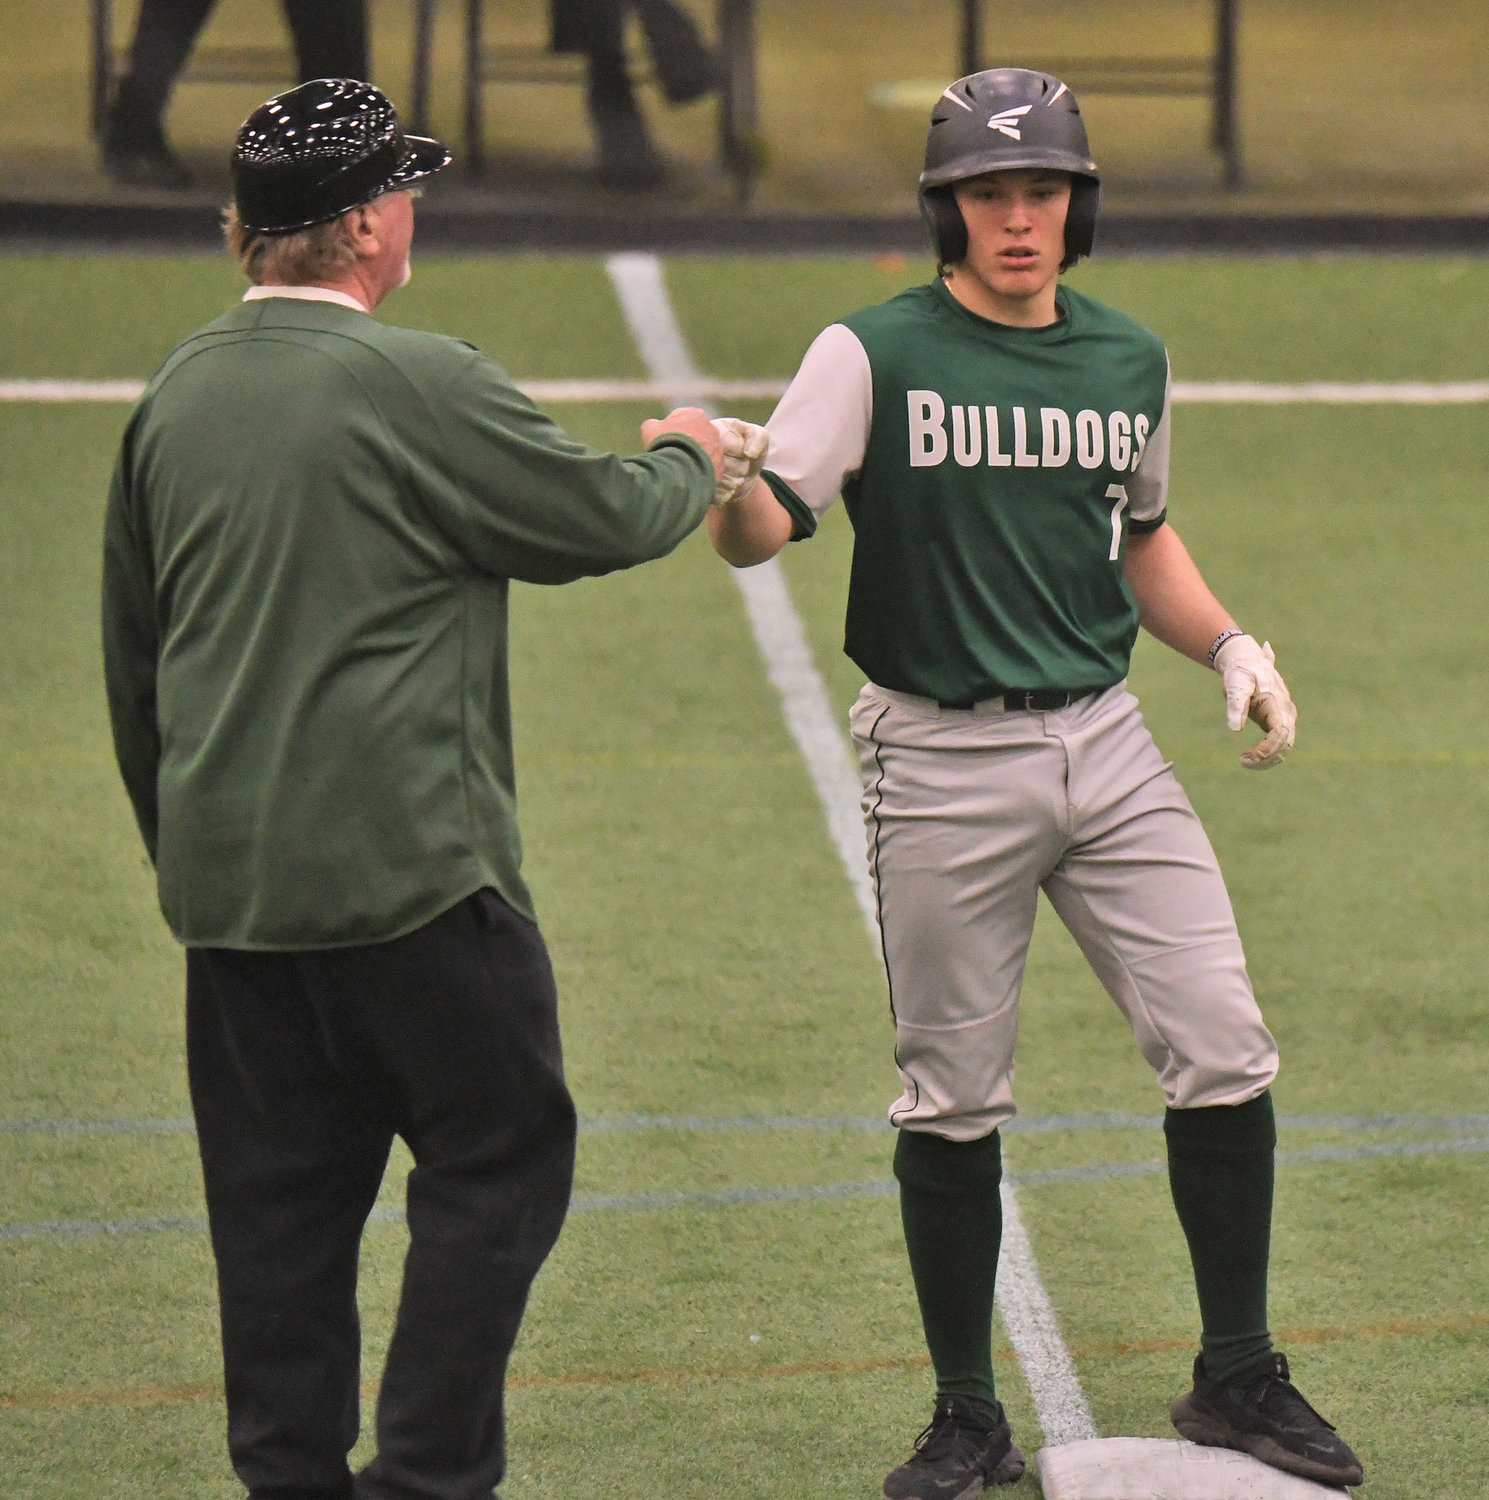 WELL DONE — Westmoreland senior Jerry Fiorini bumps fists with head coach Paul Engelhart during a four-team scrimmage at Accelerate Sports Tuesday. Fiorini will catch and play outfield this season and is part of the team’s deep pool of pitching options.